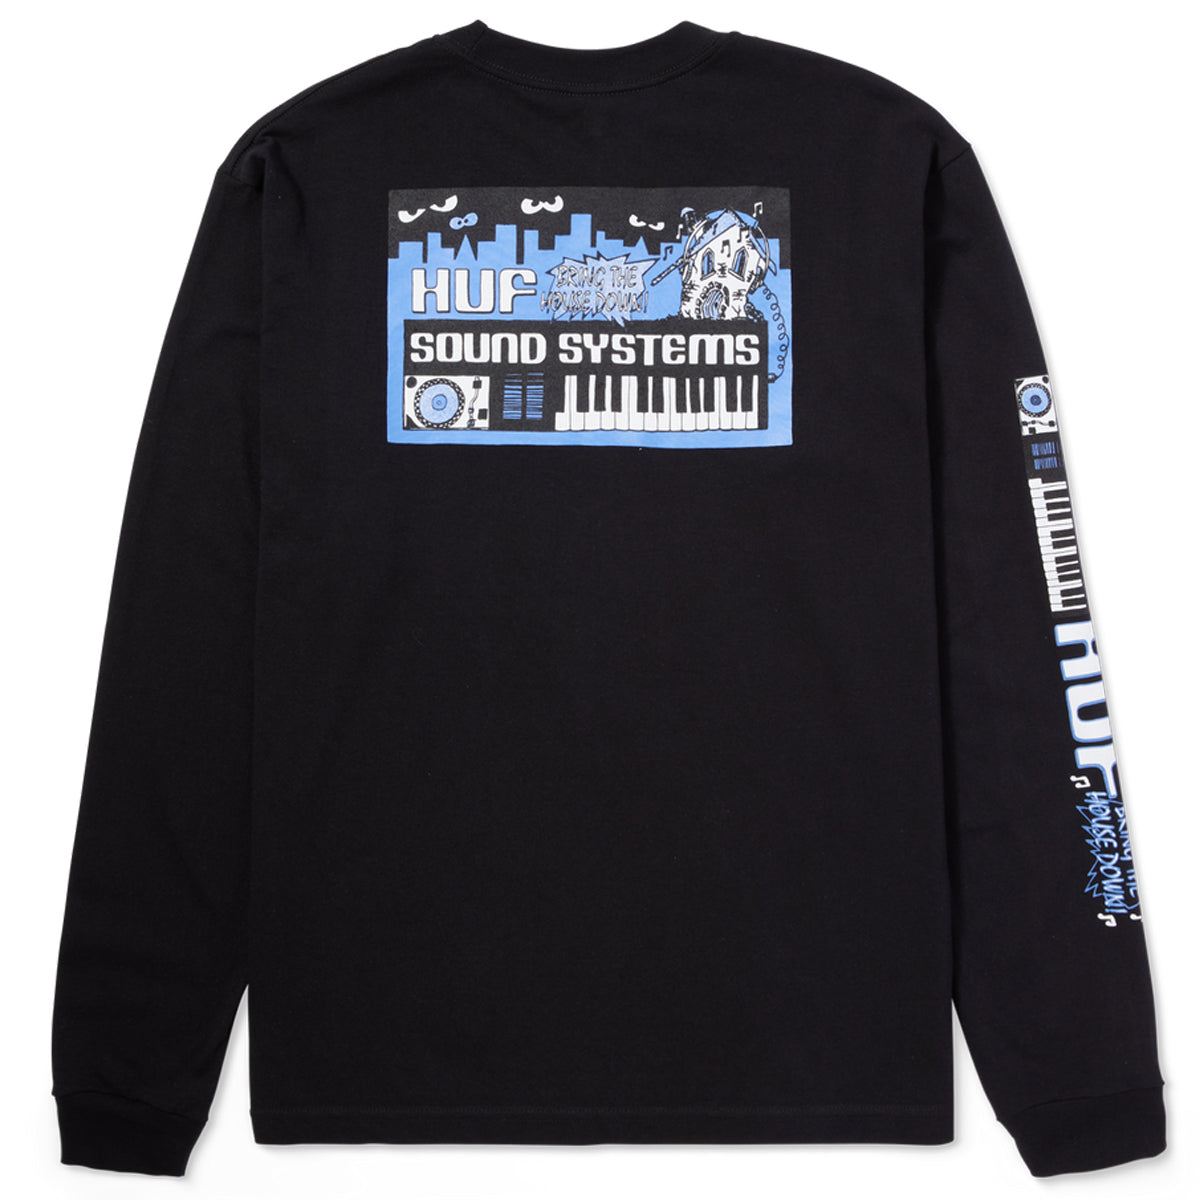 HUF Sound Systems Long Sleeve T-Shirt - Black image 2